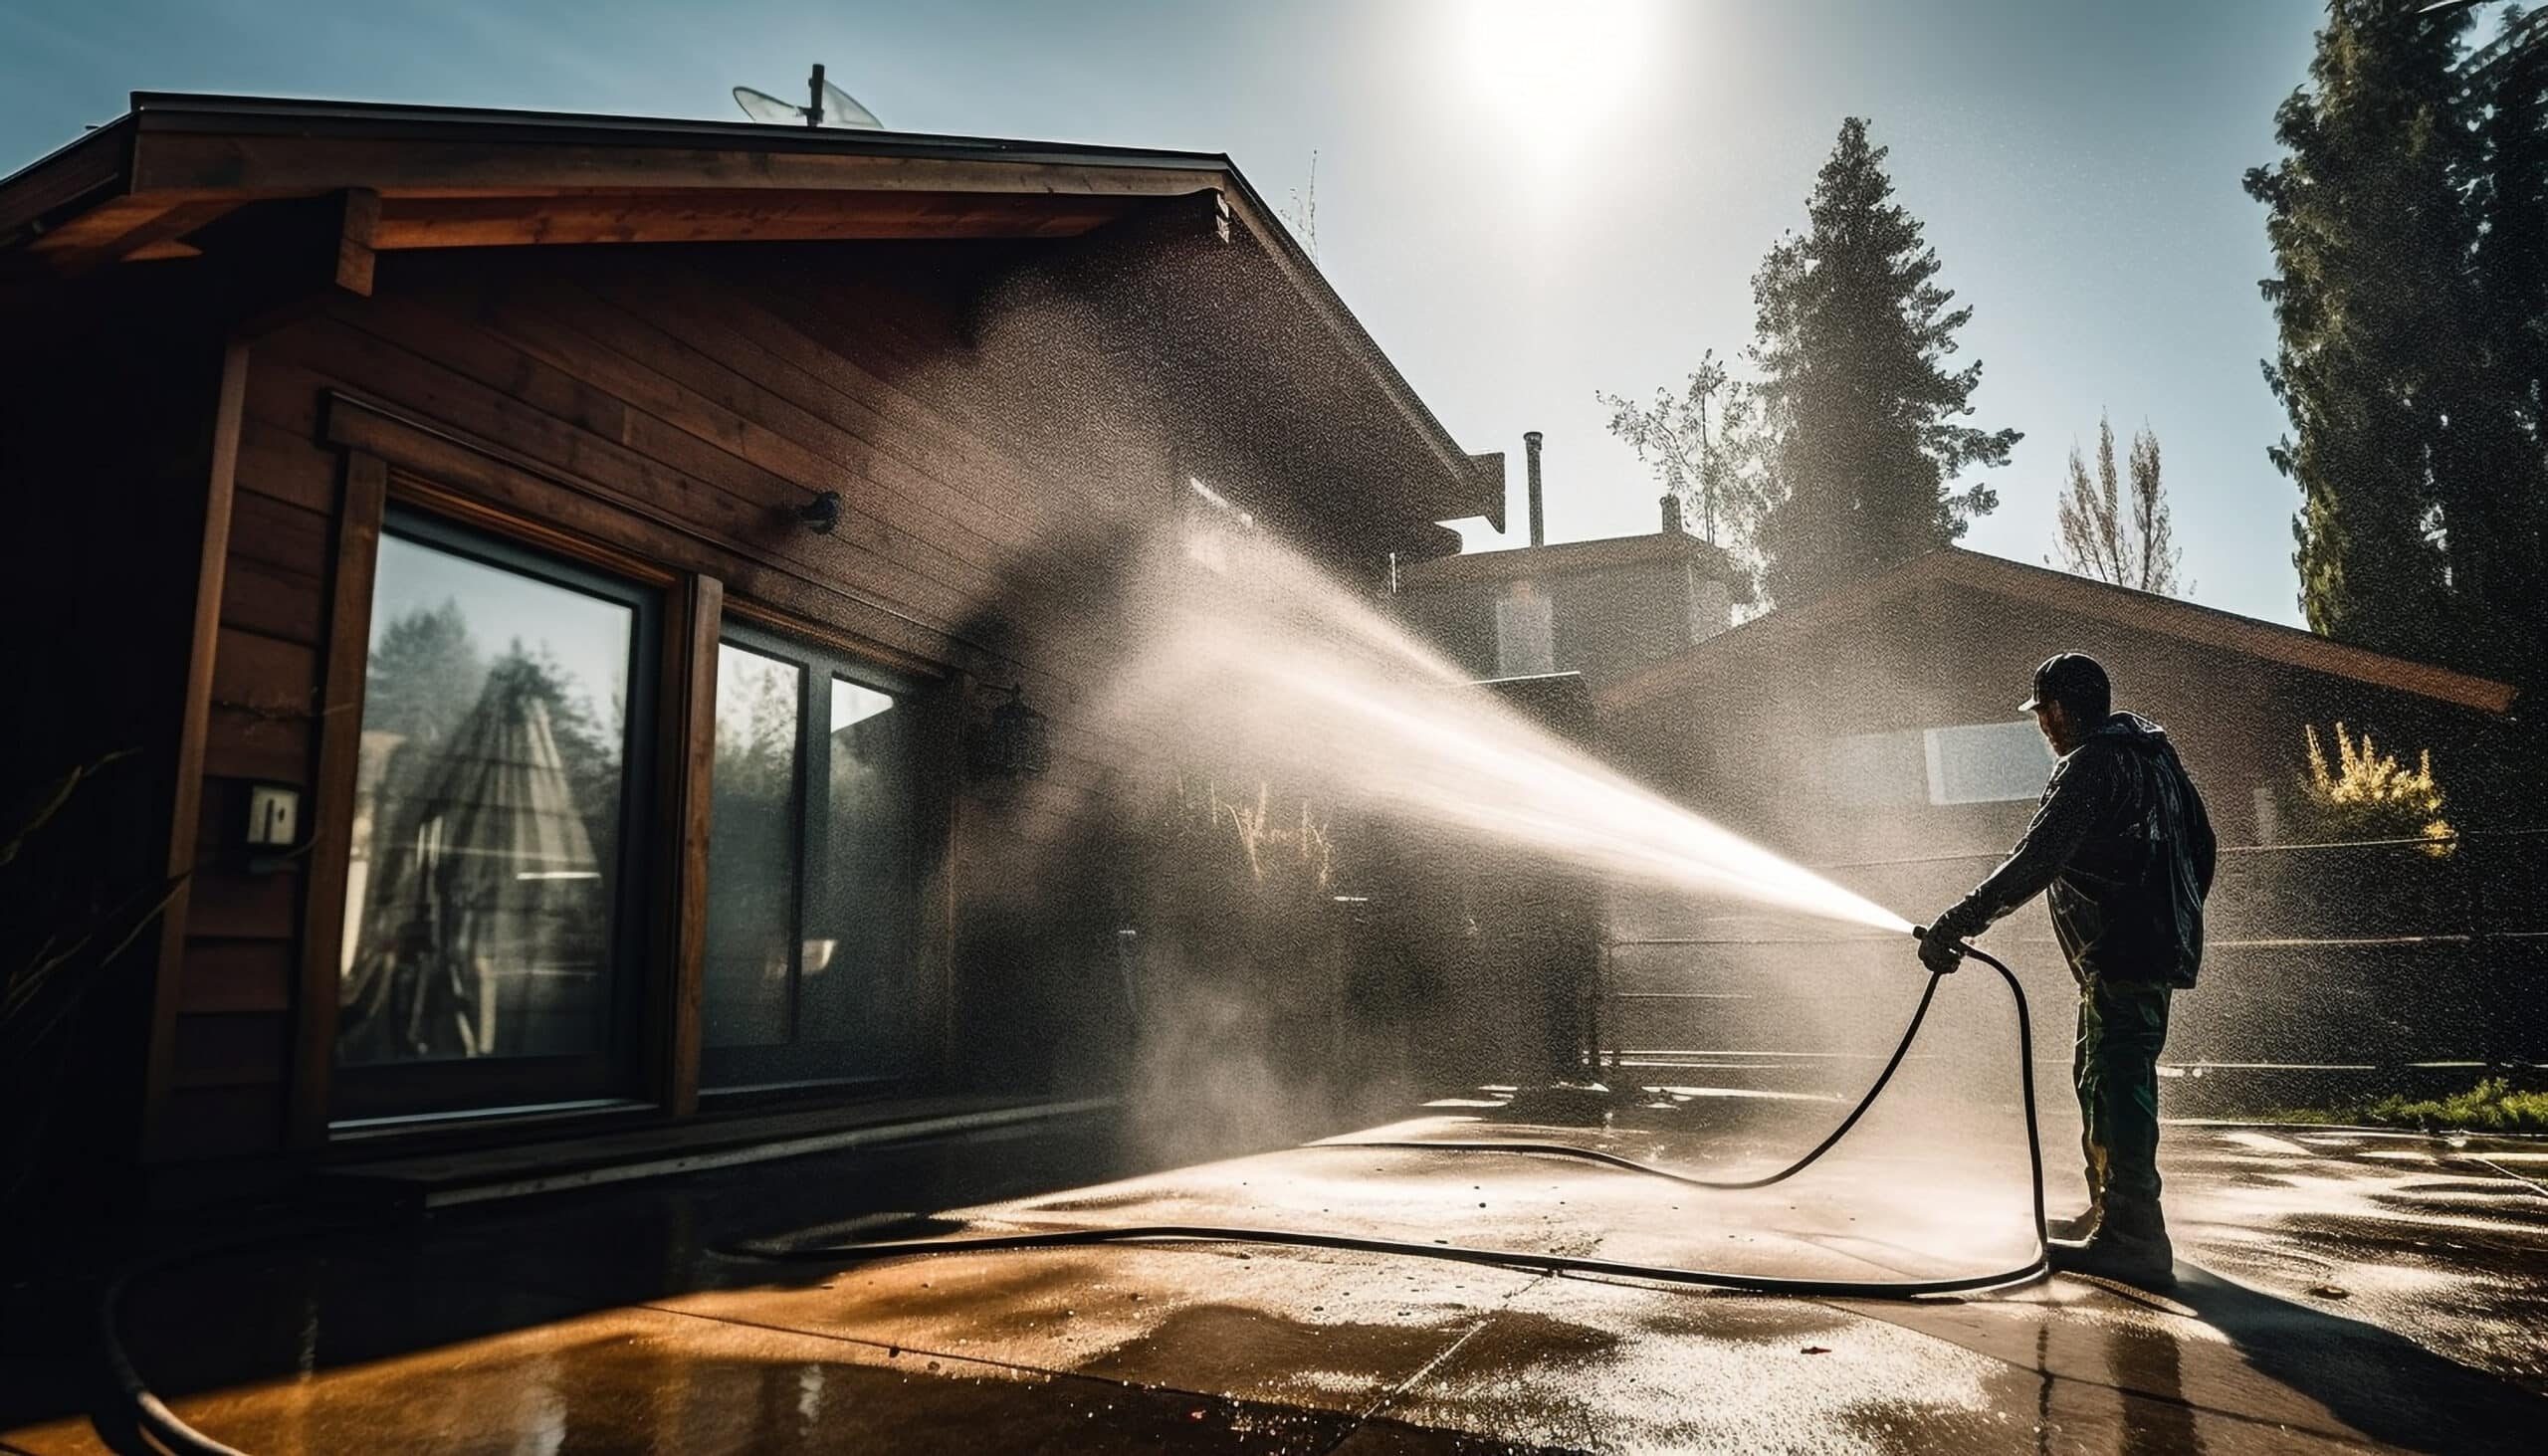 www.appr.com : Can I use bleach or other chemicals with my gas pressure washer?